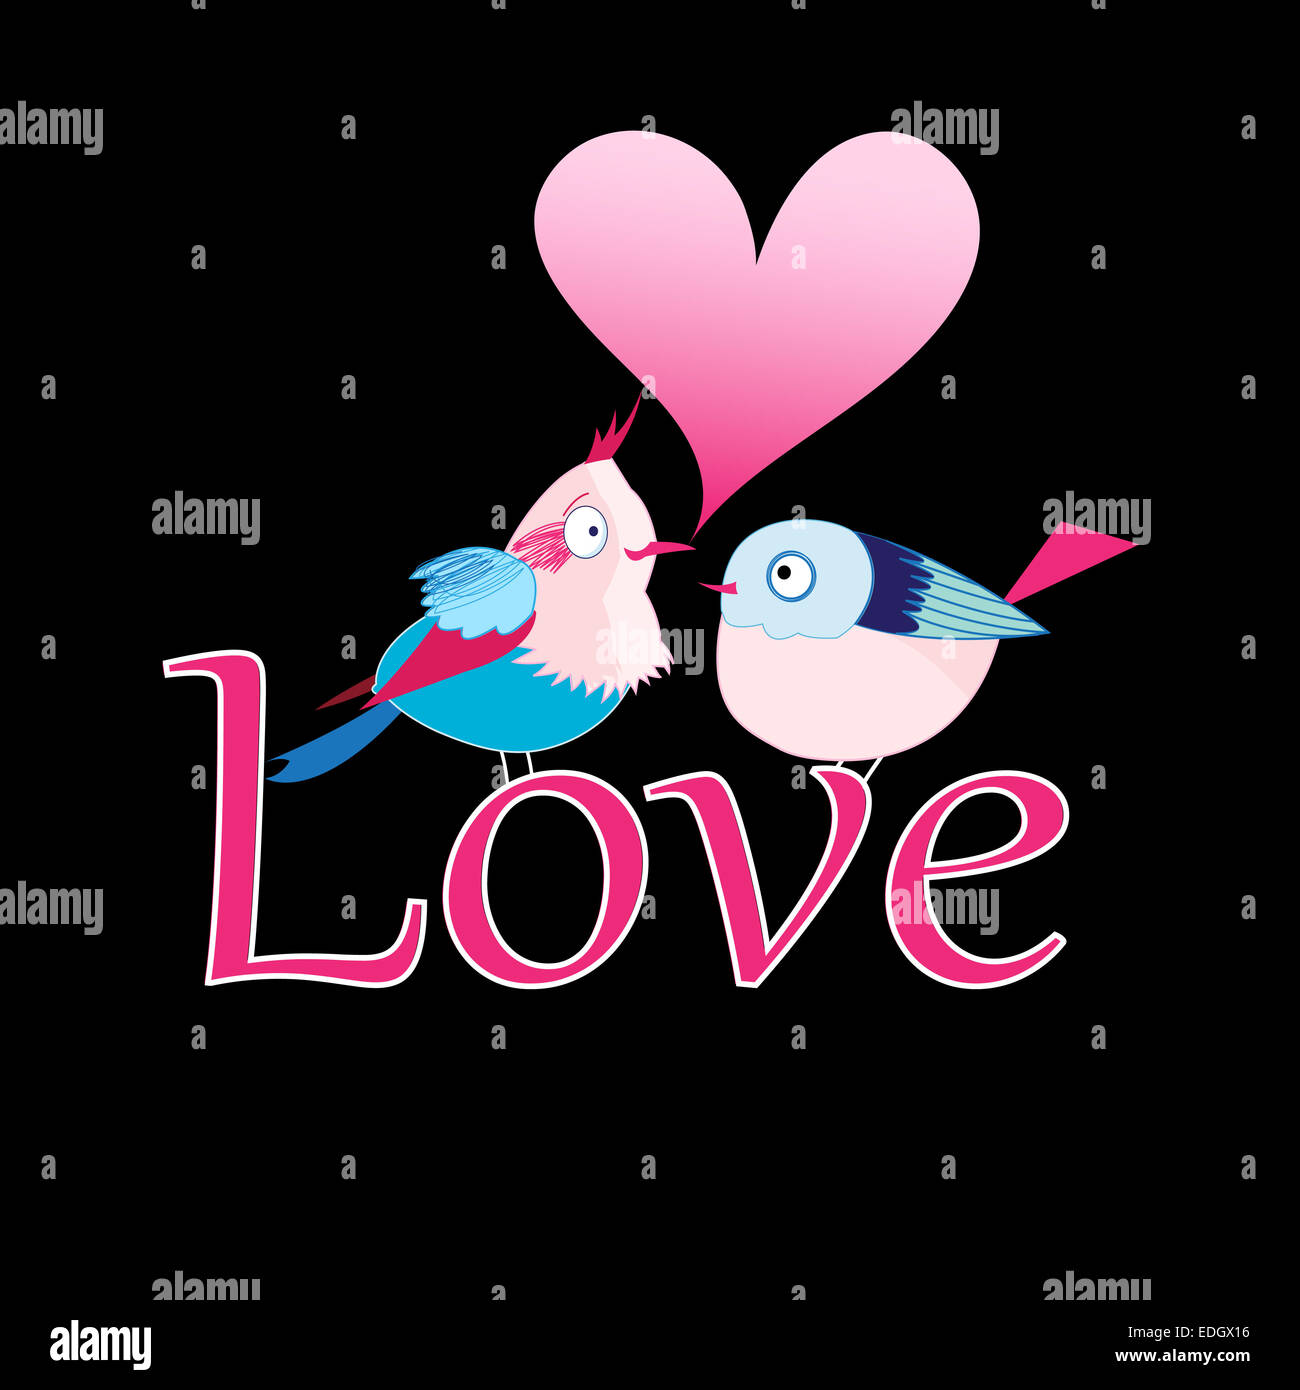 Graphic Lovers Bright Birdies On The Word Love On A Black